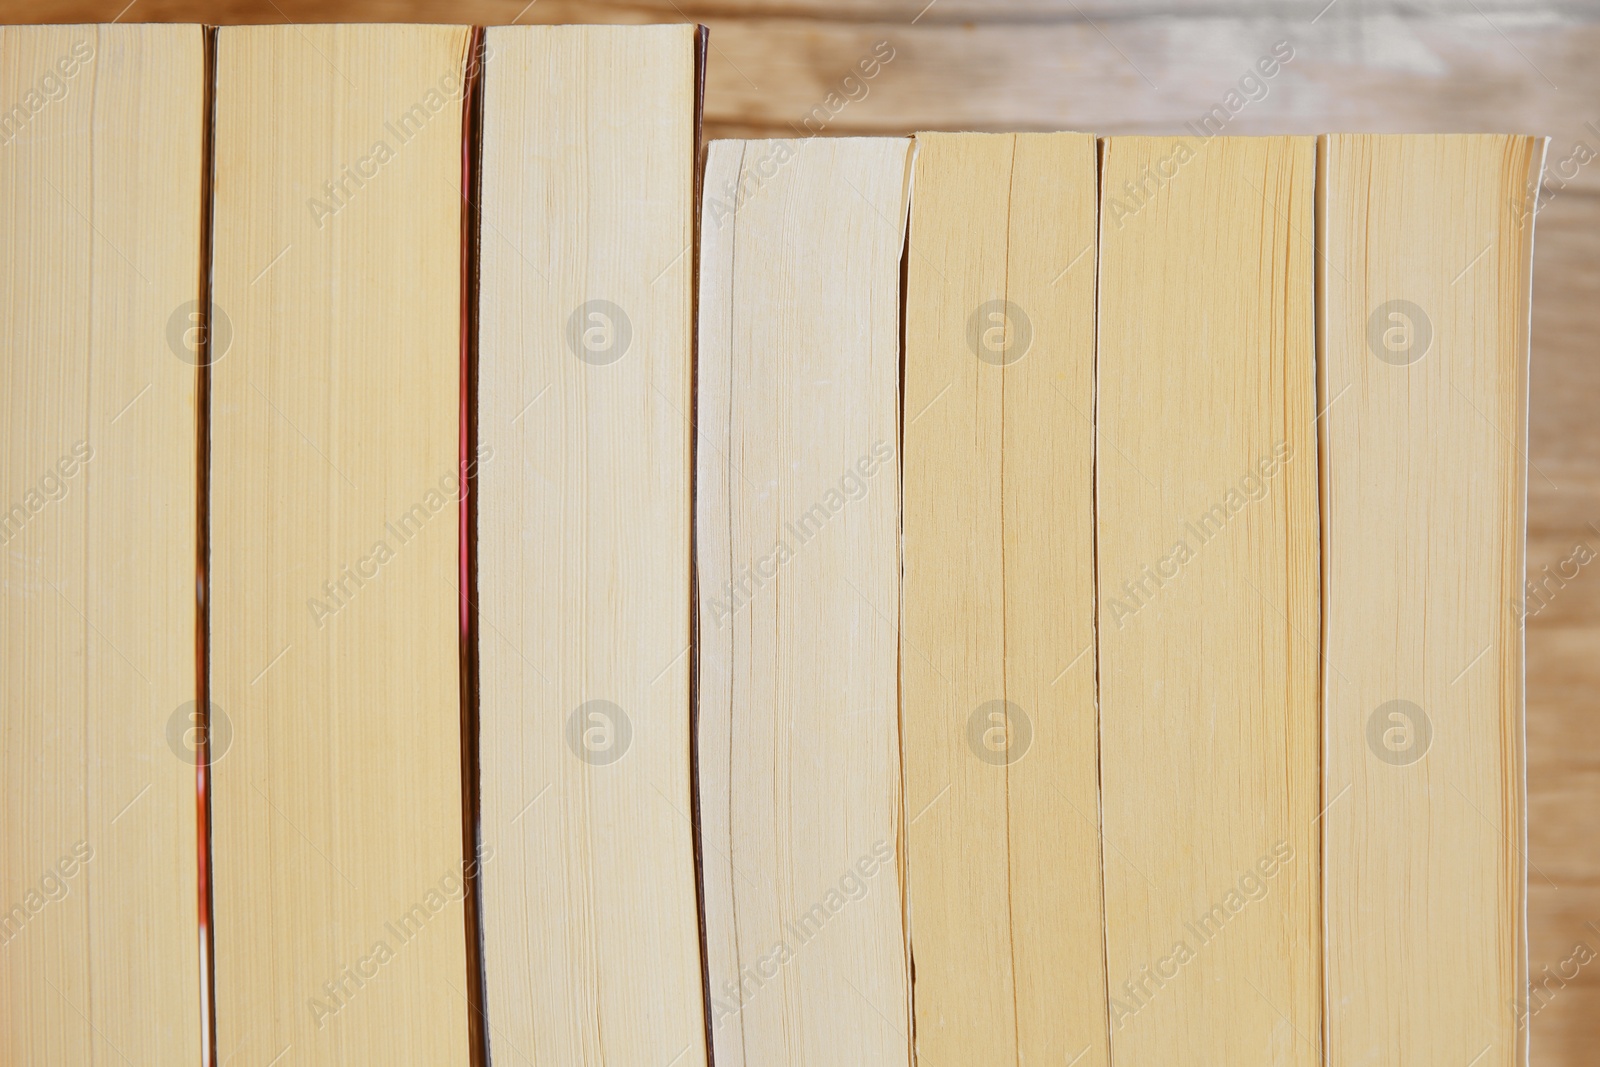 Photo of Collection of different books against wooden background, closeup